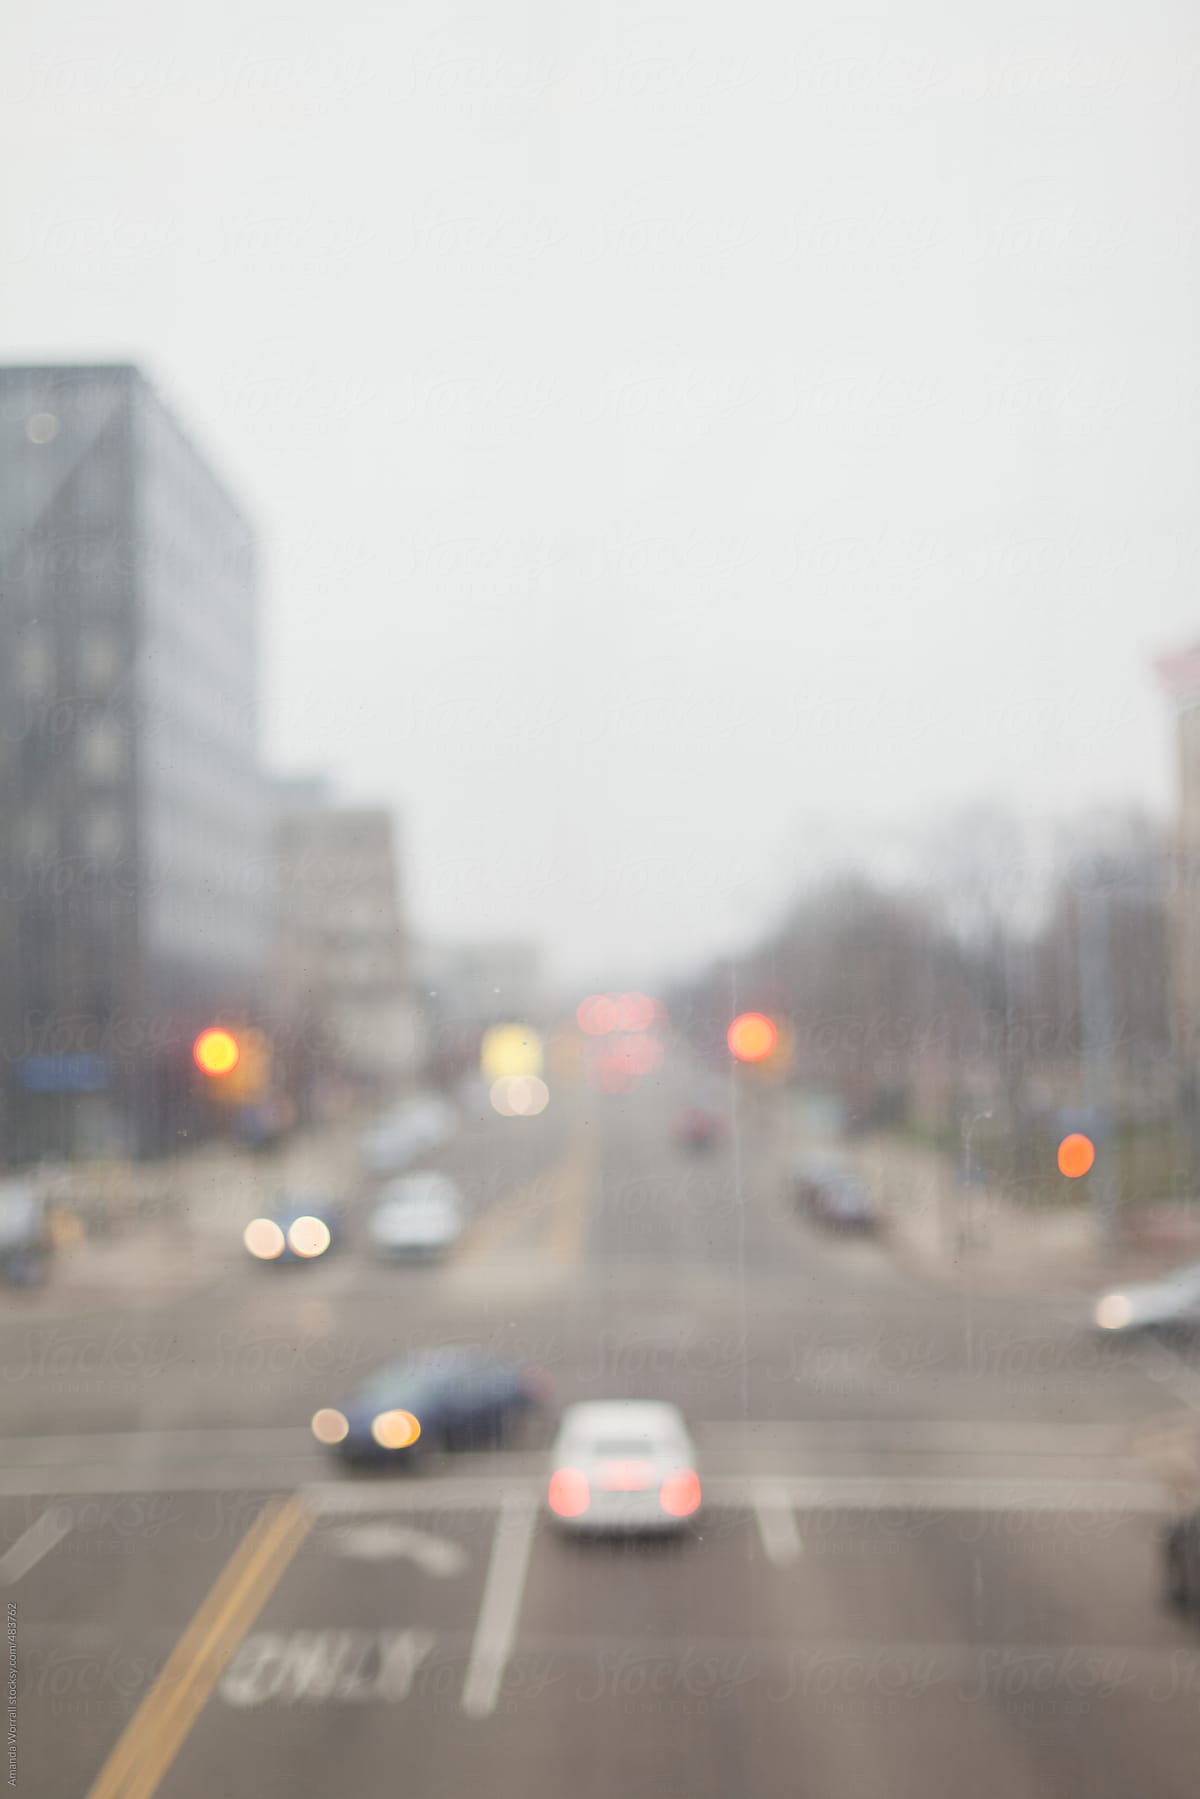 Out of focus view of city intersection through a dirty window